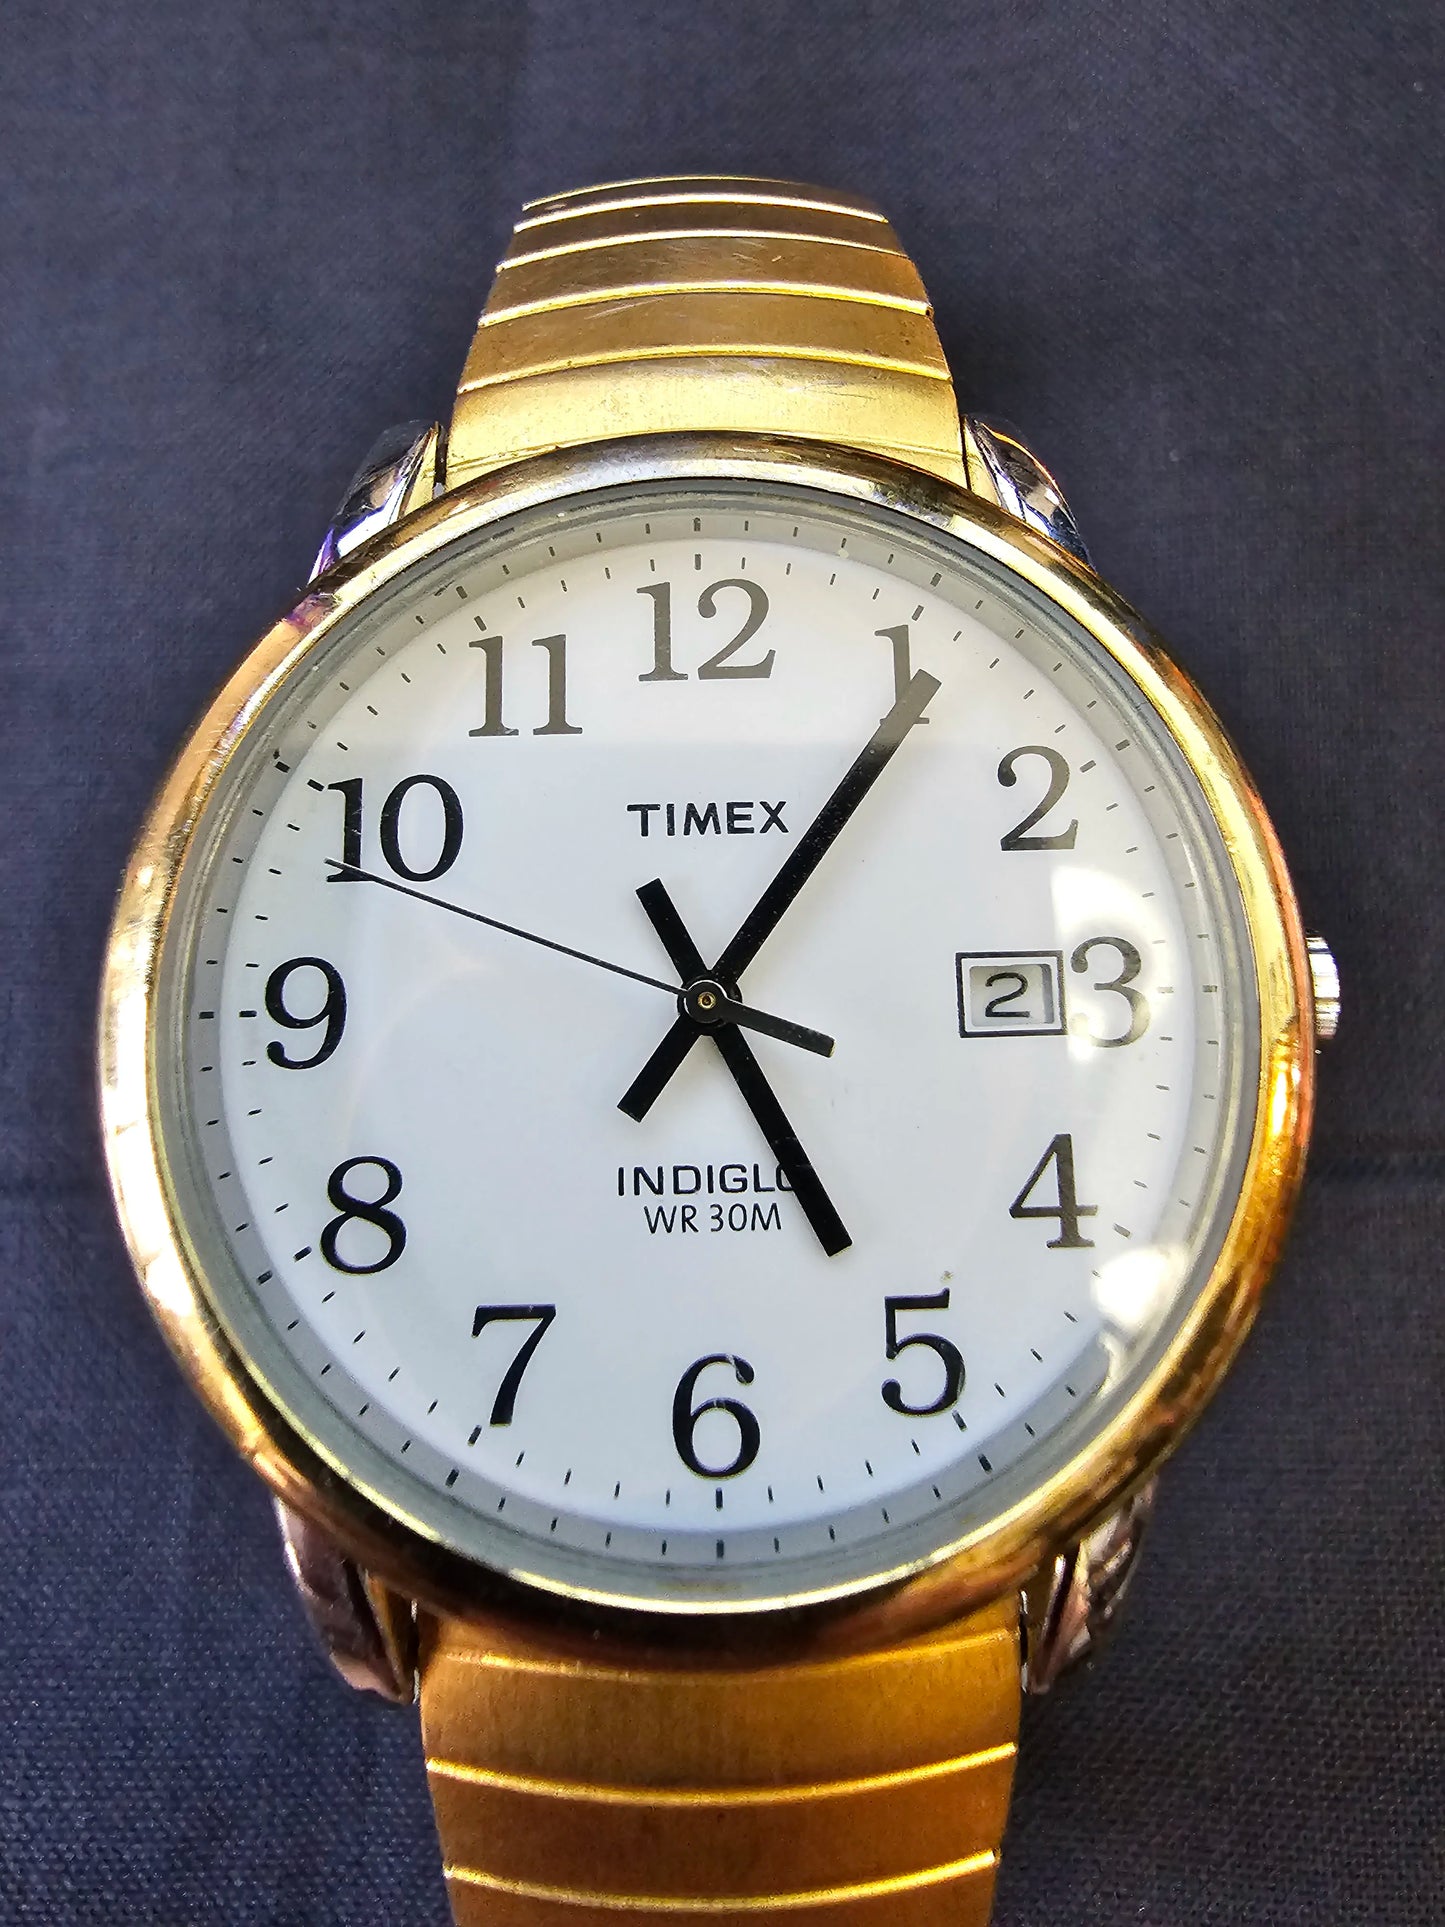 Timex Indiglo WR 30M Gold Band